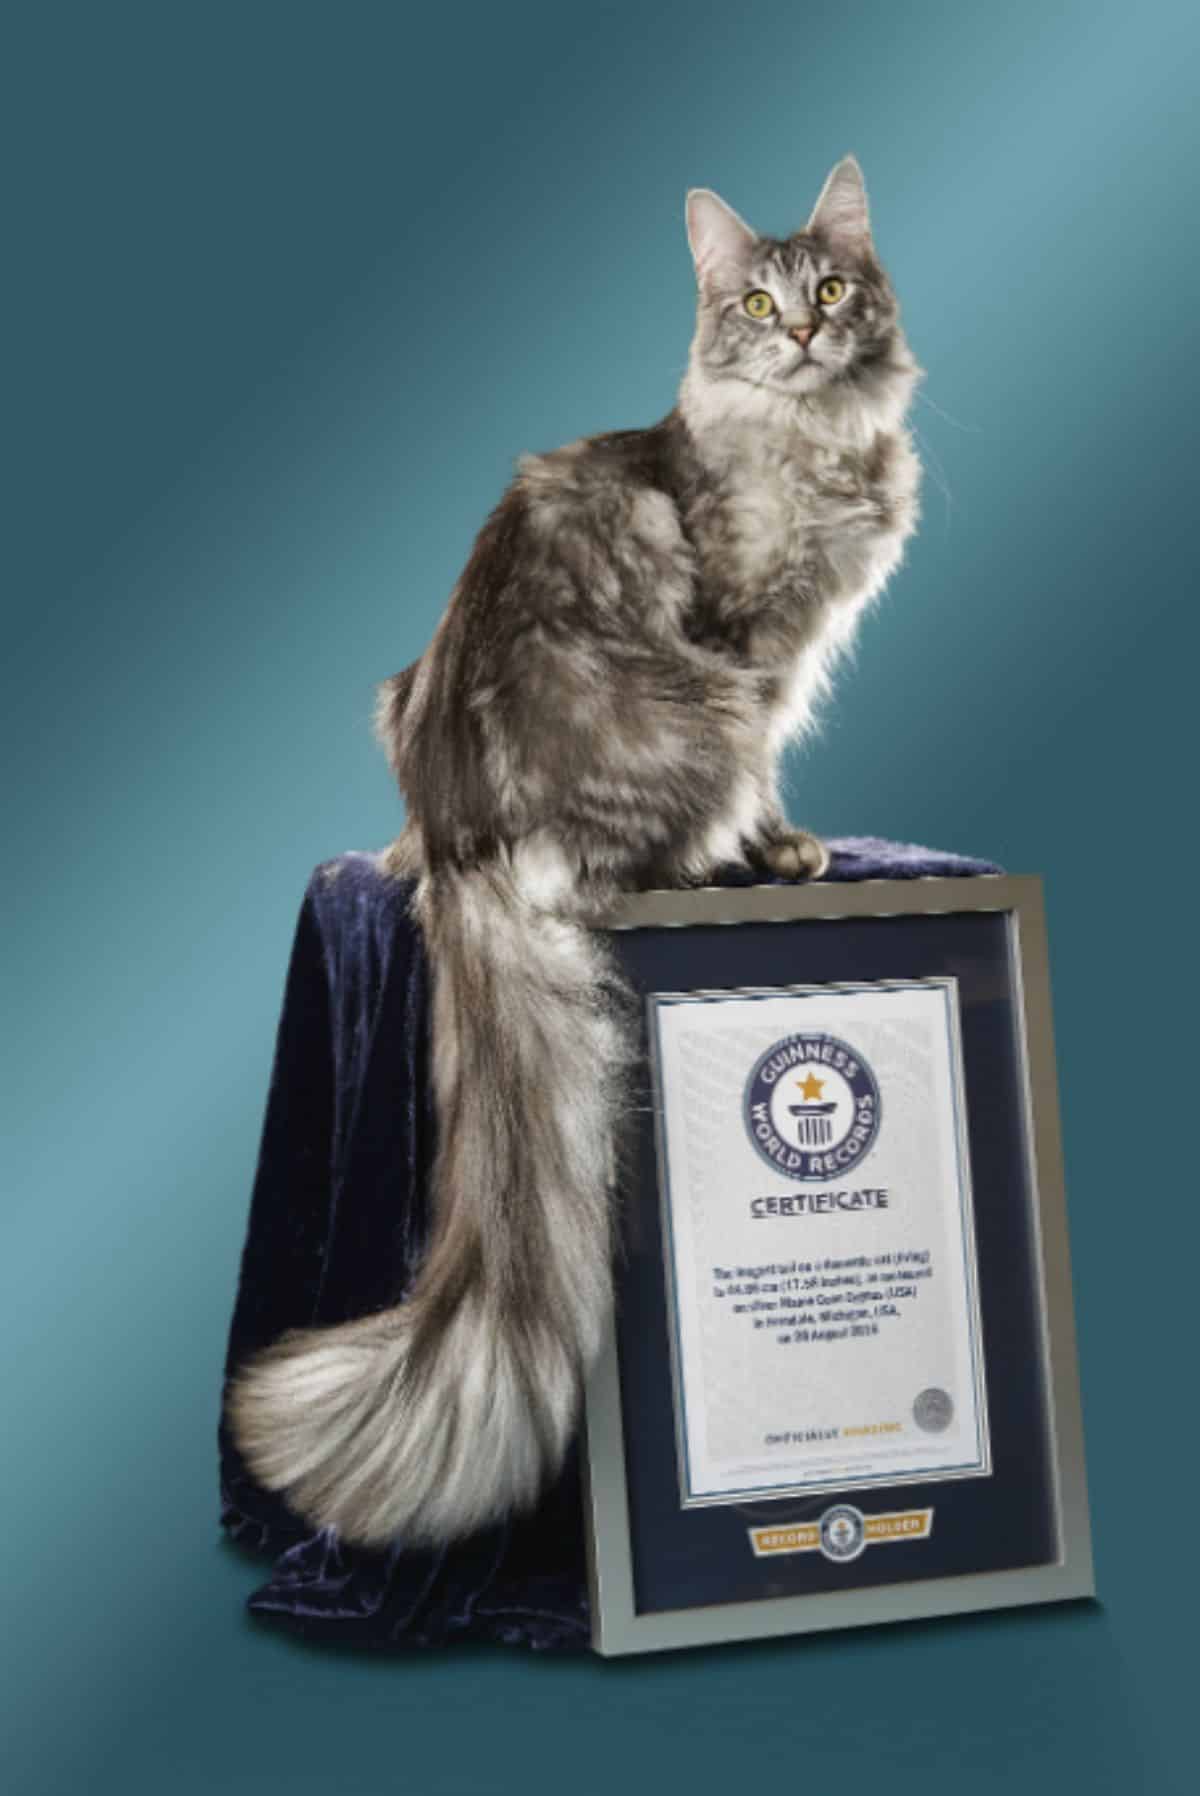 A gray maine coon cat sitting on a piedestal.